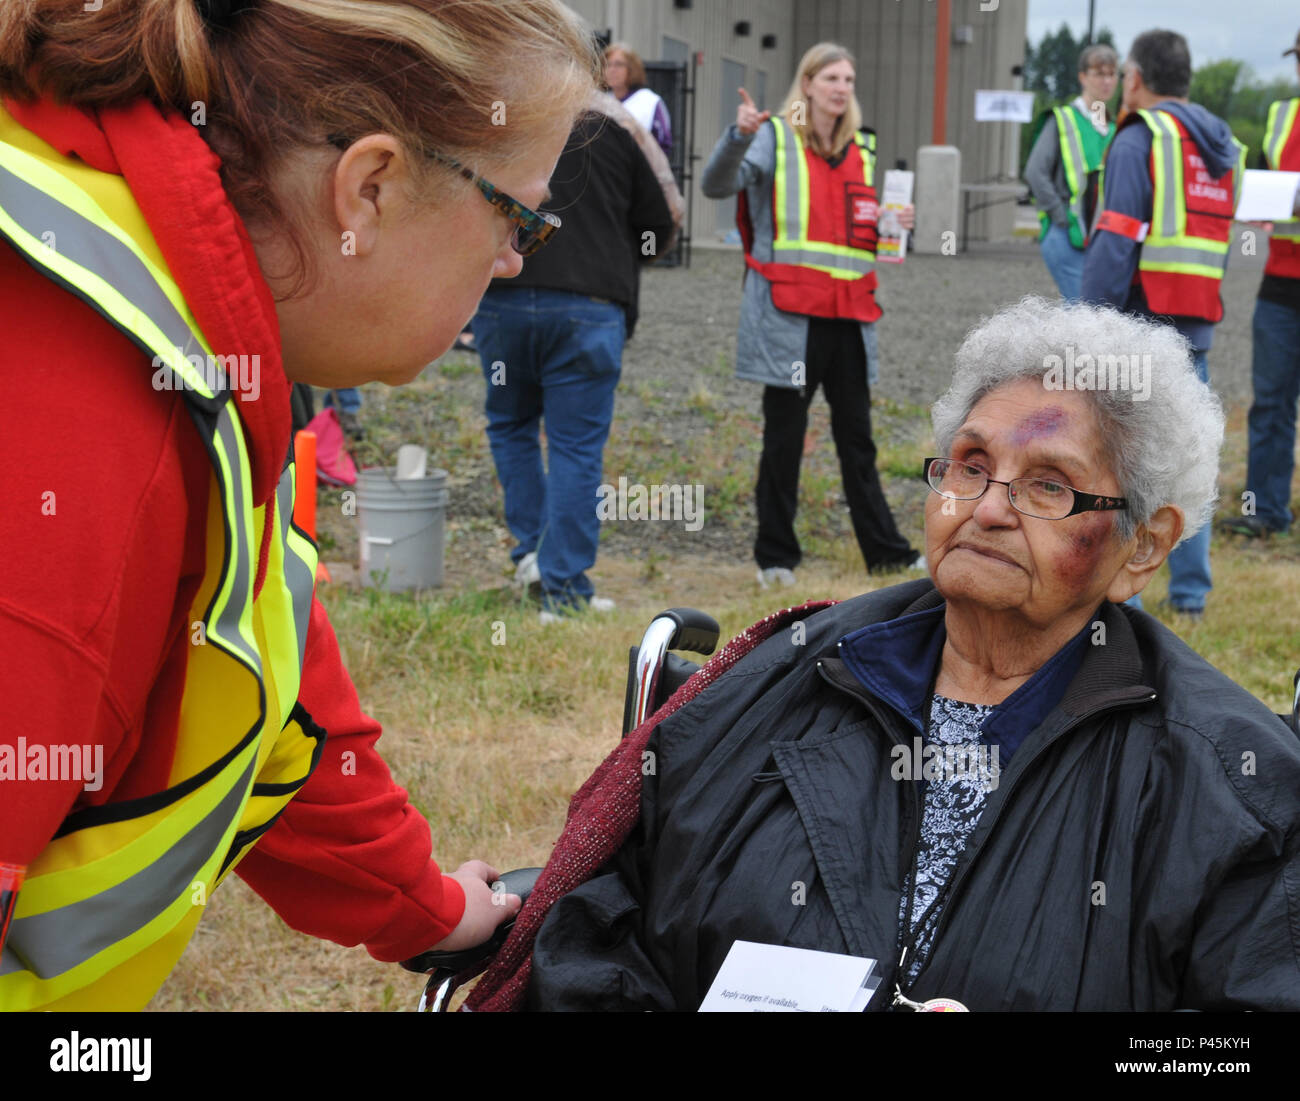 Kecia Harris, a nurse practioner with the Grand Ronde Clinic, cares for victim volunteer, Catherine Harrison, during the simulated rescue operations exercise Cascadia Rising, June 9, 2016, in Grand Ronde, Ore. Cascadia Rising is a four-day functional exercise focused on interagency and multi-state coordination to provide decision makers with information to implement programs and policies in the event of a Cascadia Subduction Zone earthquake and tsunami. (Oregon Army National Guard photo by Staff Sgt. Anita VanderMolen, 115th Mobile Public Affairs Detachment) Stock Photo